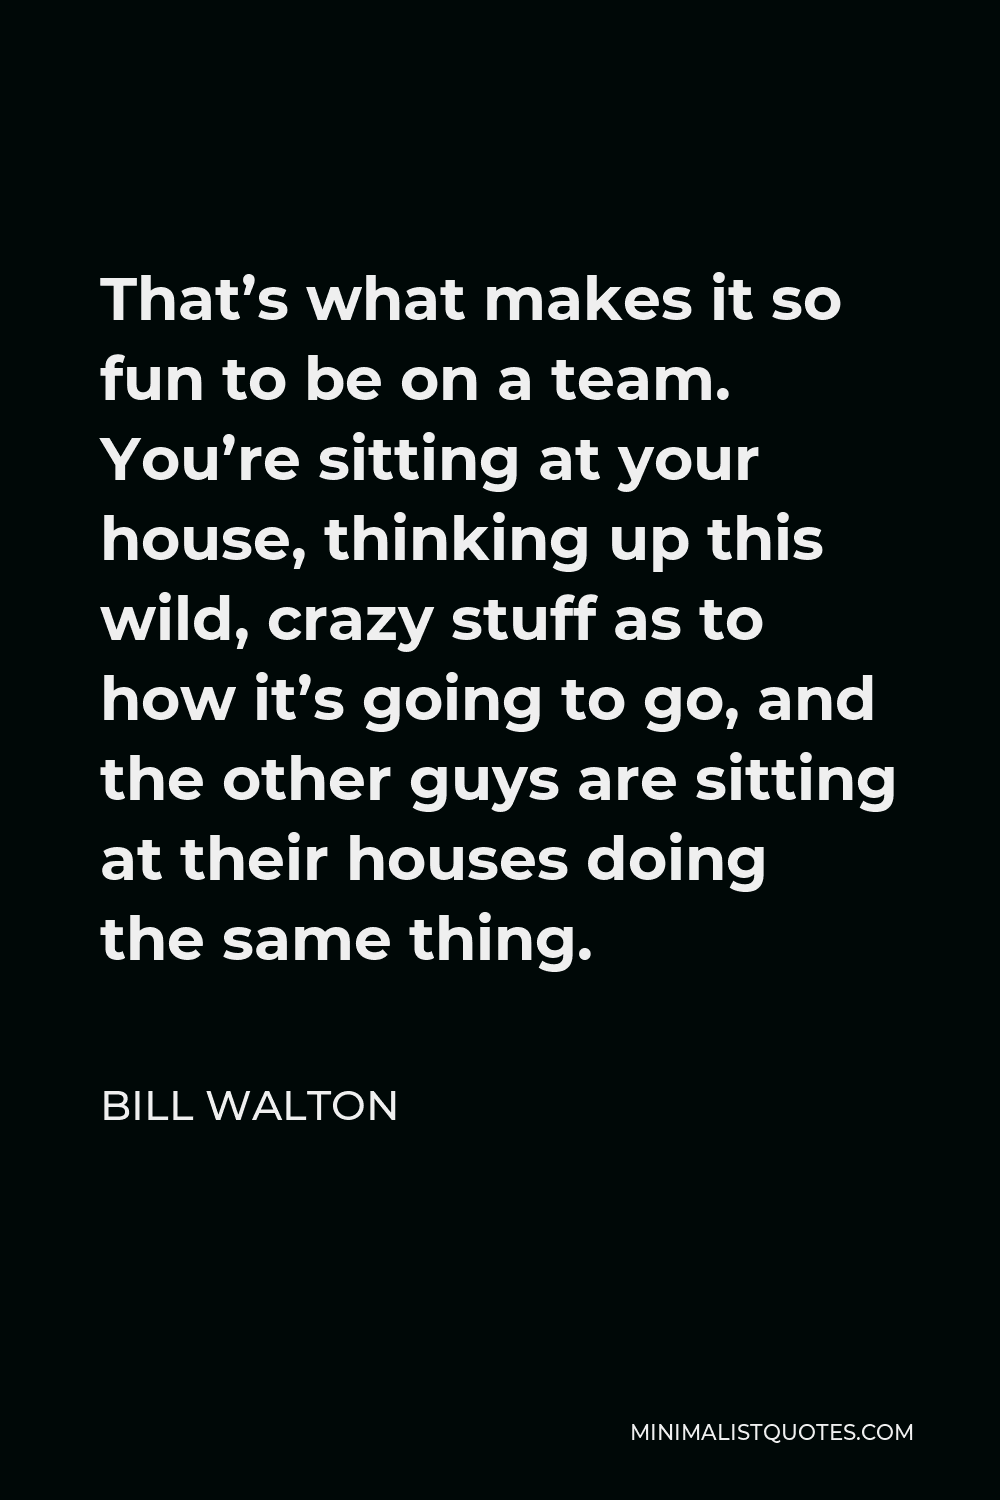 Bill Walton Quote - That’s what makes it so fun to be on a team. You’re sitting at your house, thinking up this wild, crazy stuff as to how it’s going to go, and the other guys are sitting at their houses doing the same thing.